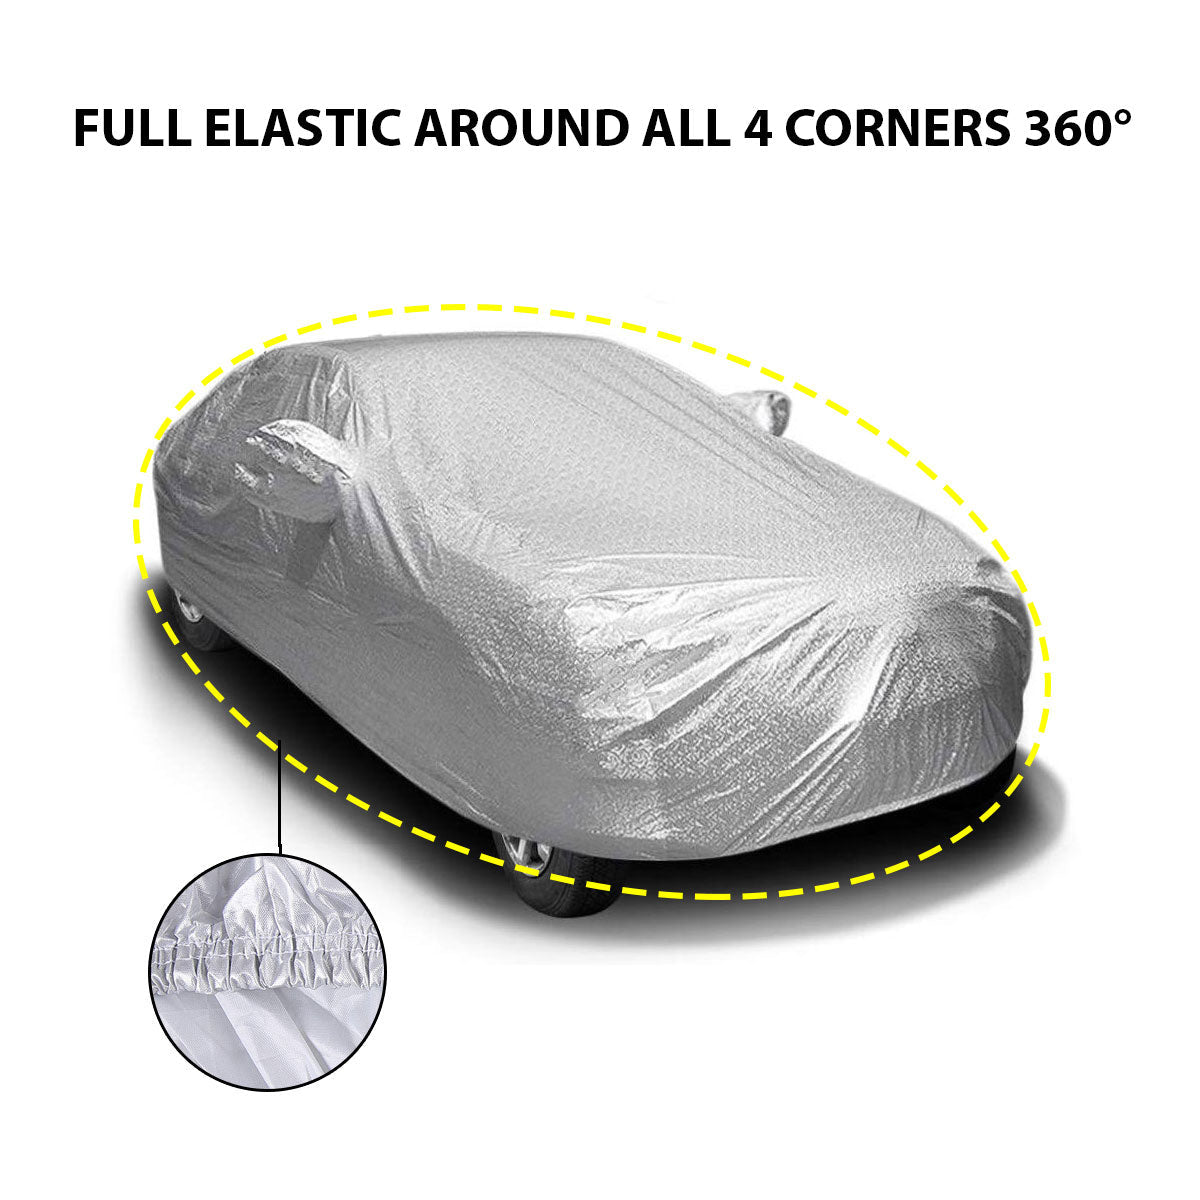 Oshotto Spyro Silver Anti Reflective, dustproof and Water Proof Car Body Cover with Mirror Pockets For Hyundai i10 Grand